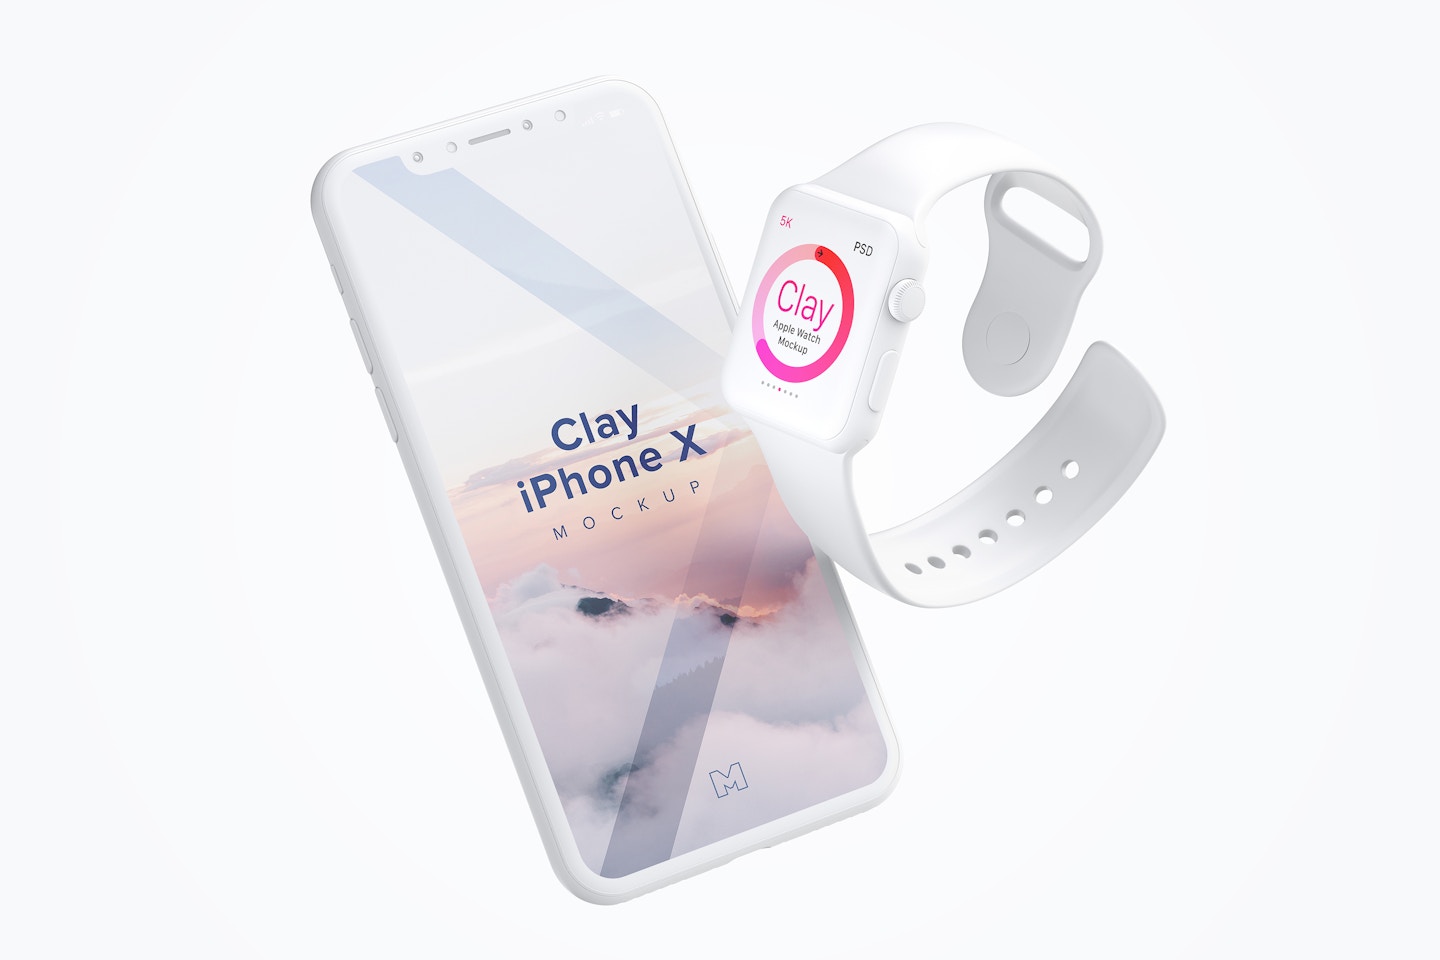 Clay Apple Watch and iPhone X Mockup